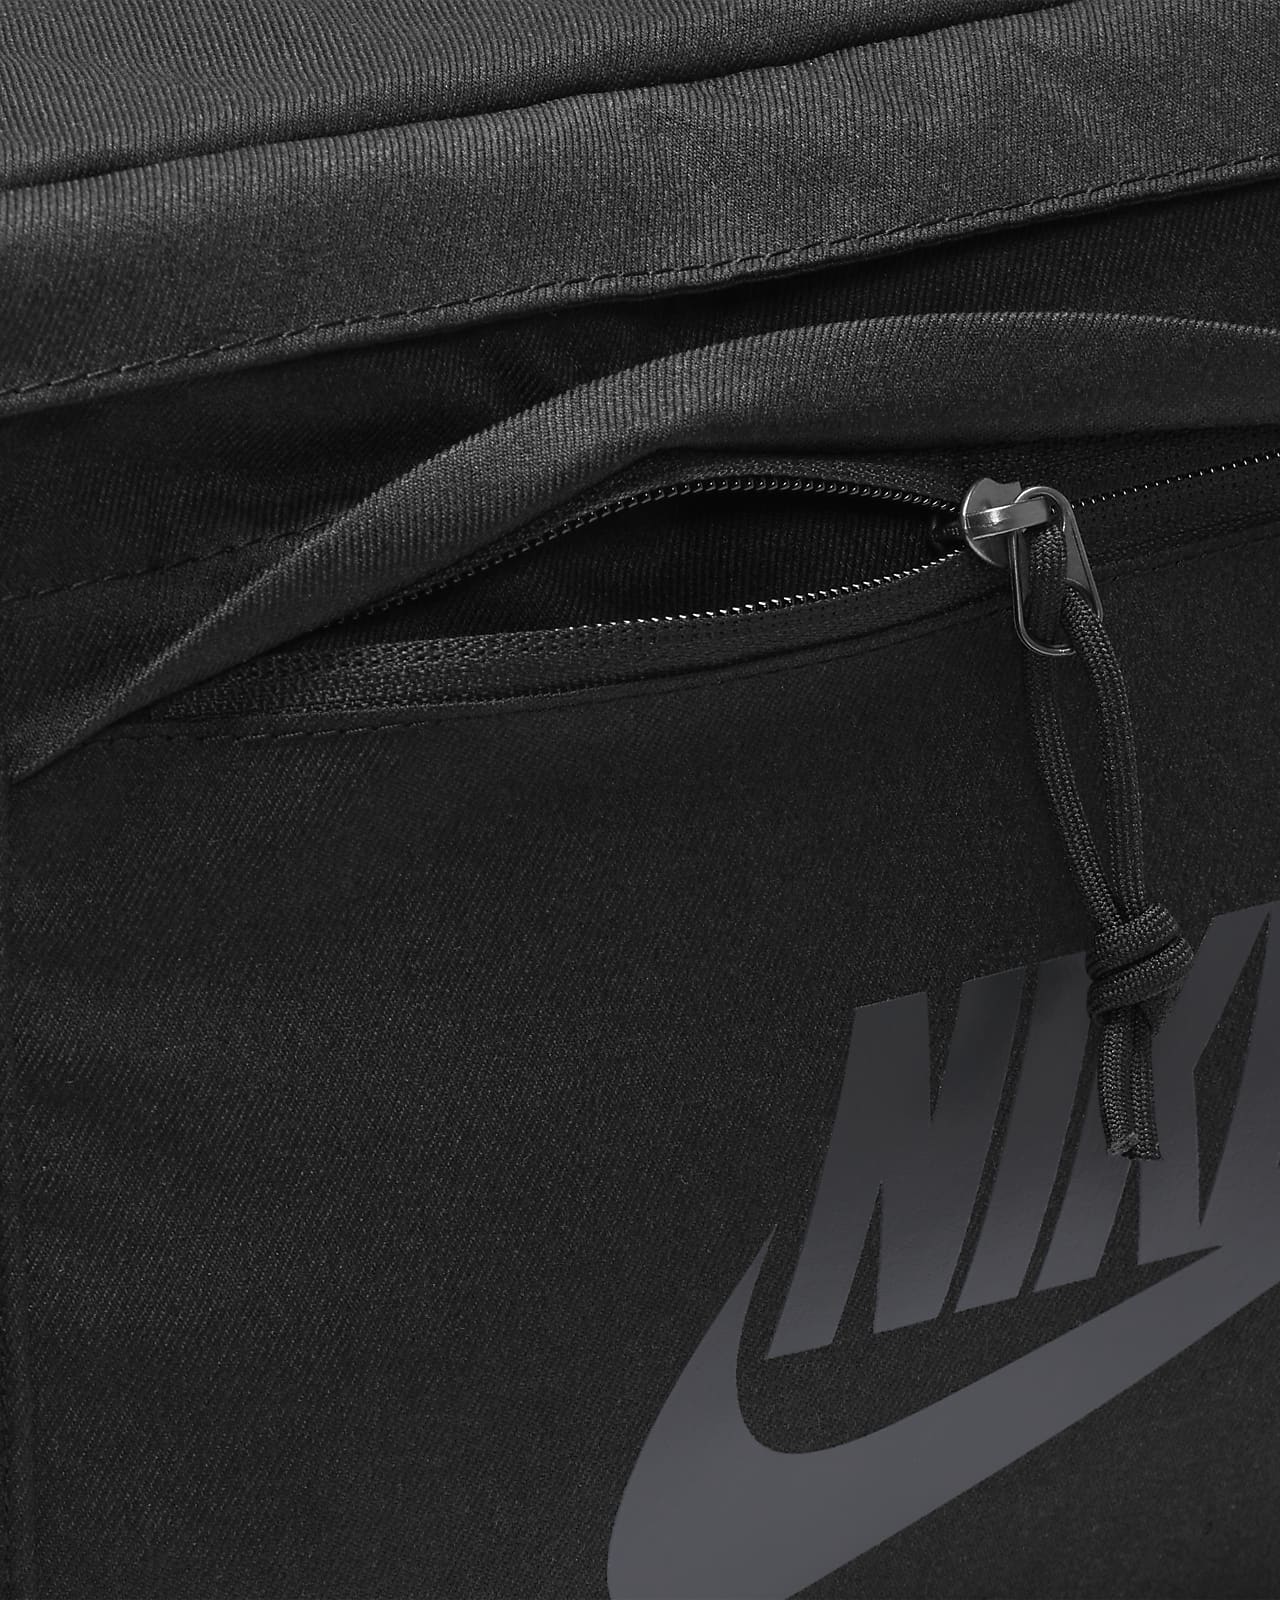 Share more than 80 nike waist bags best - in.cdgdbentre